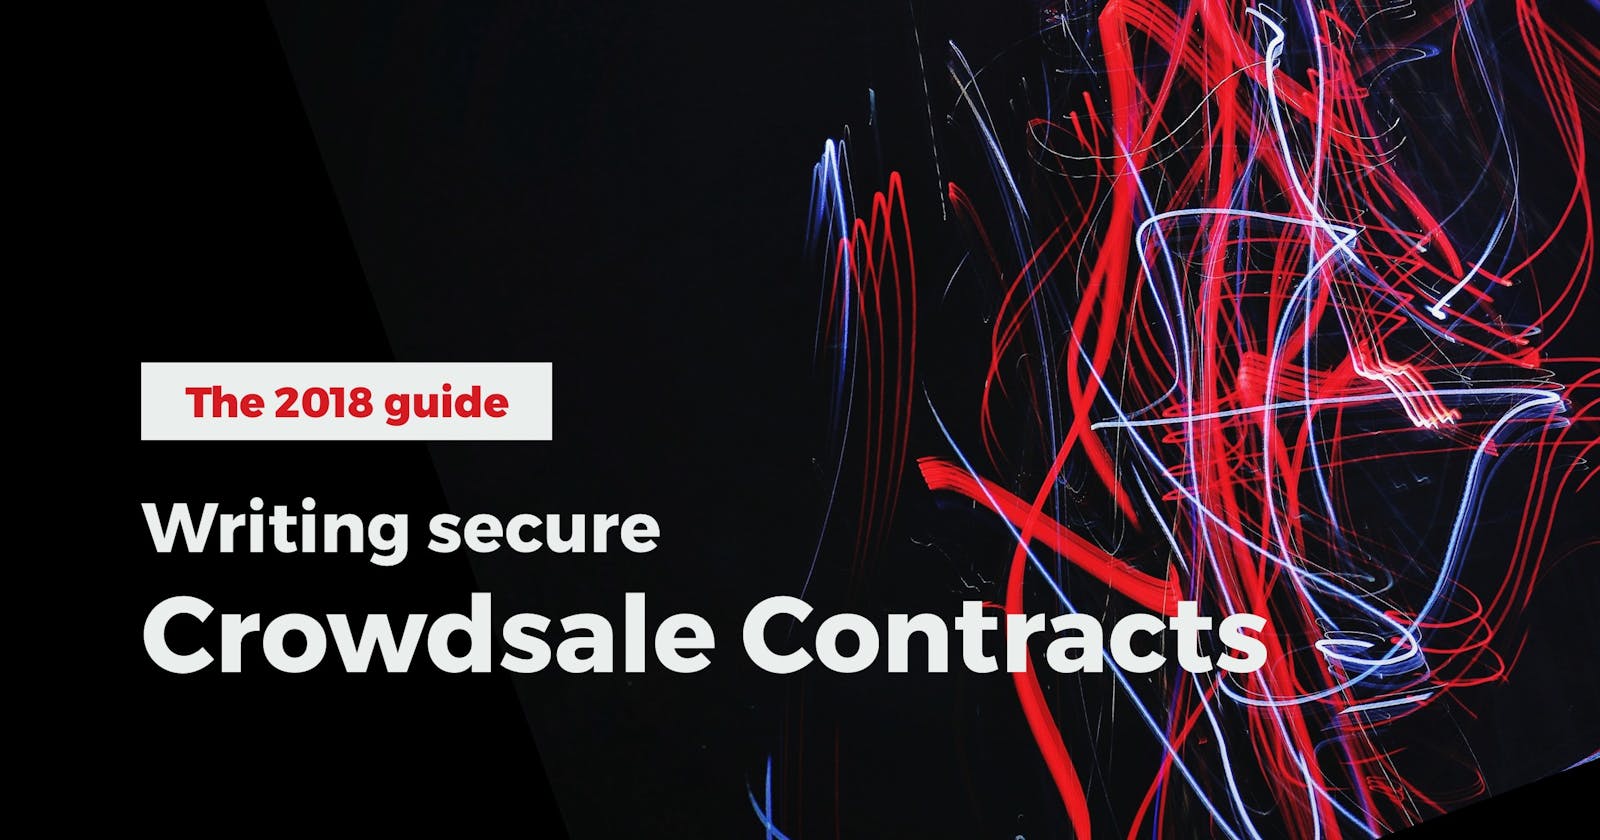 The 2018 guide to writing (and testing) real world crowdsale contracts